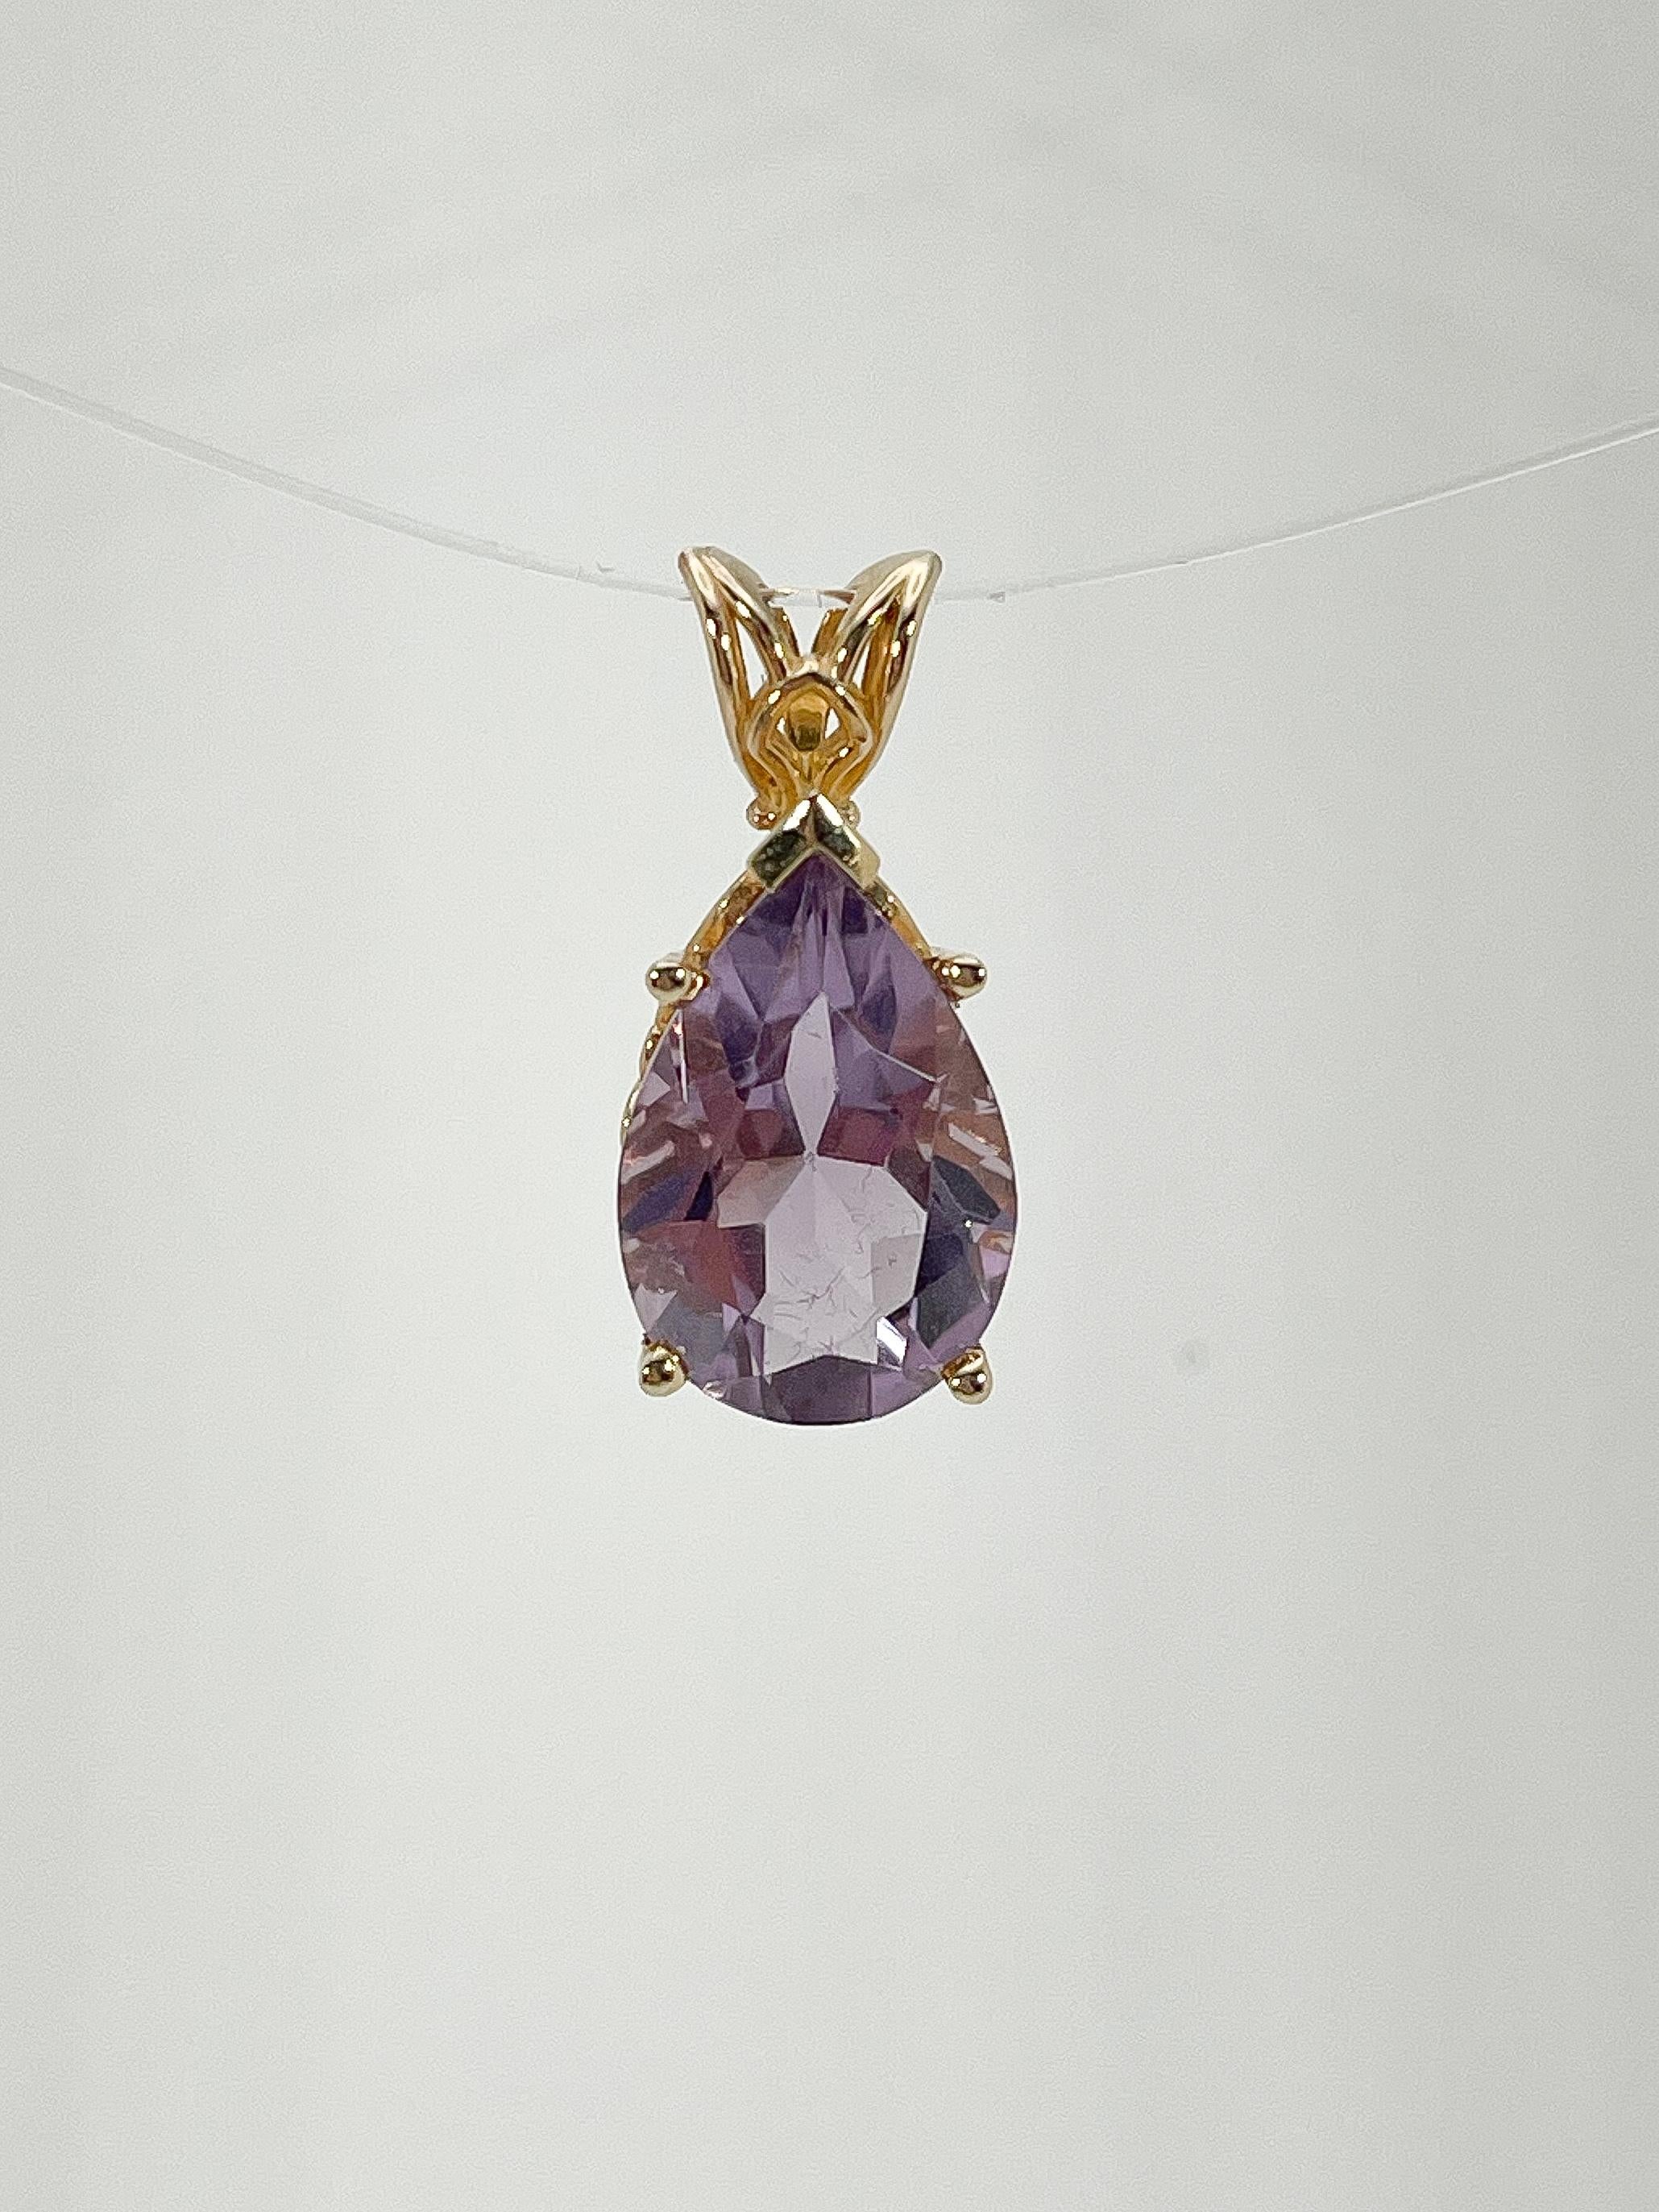 14k yellow gold pear amethyst pendant. Engraved detailing on the sides, the pendant measures 10 x 17 mm, the inside bail measures 4 x 7 mm, and the total weight of the pendant is 2.9 grams. Pendant comes alone, necklace not included.